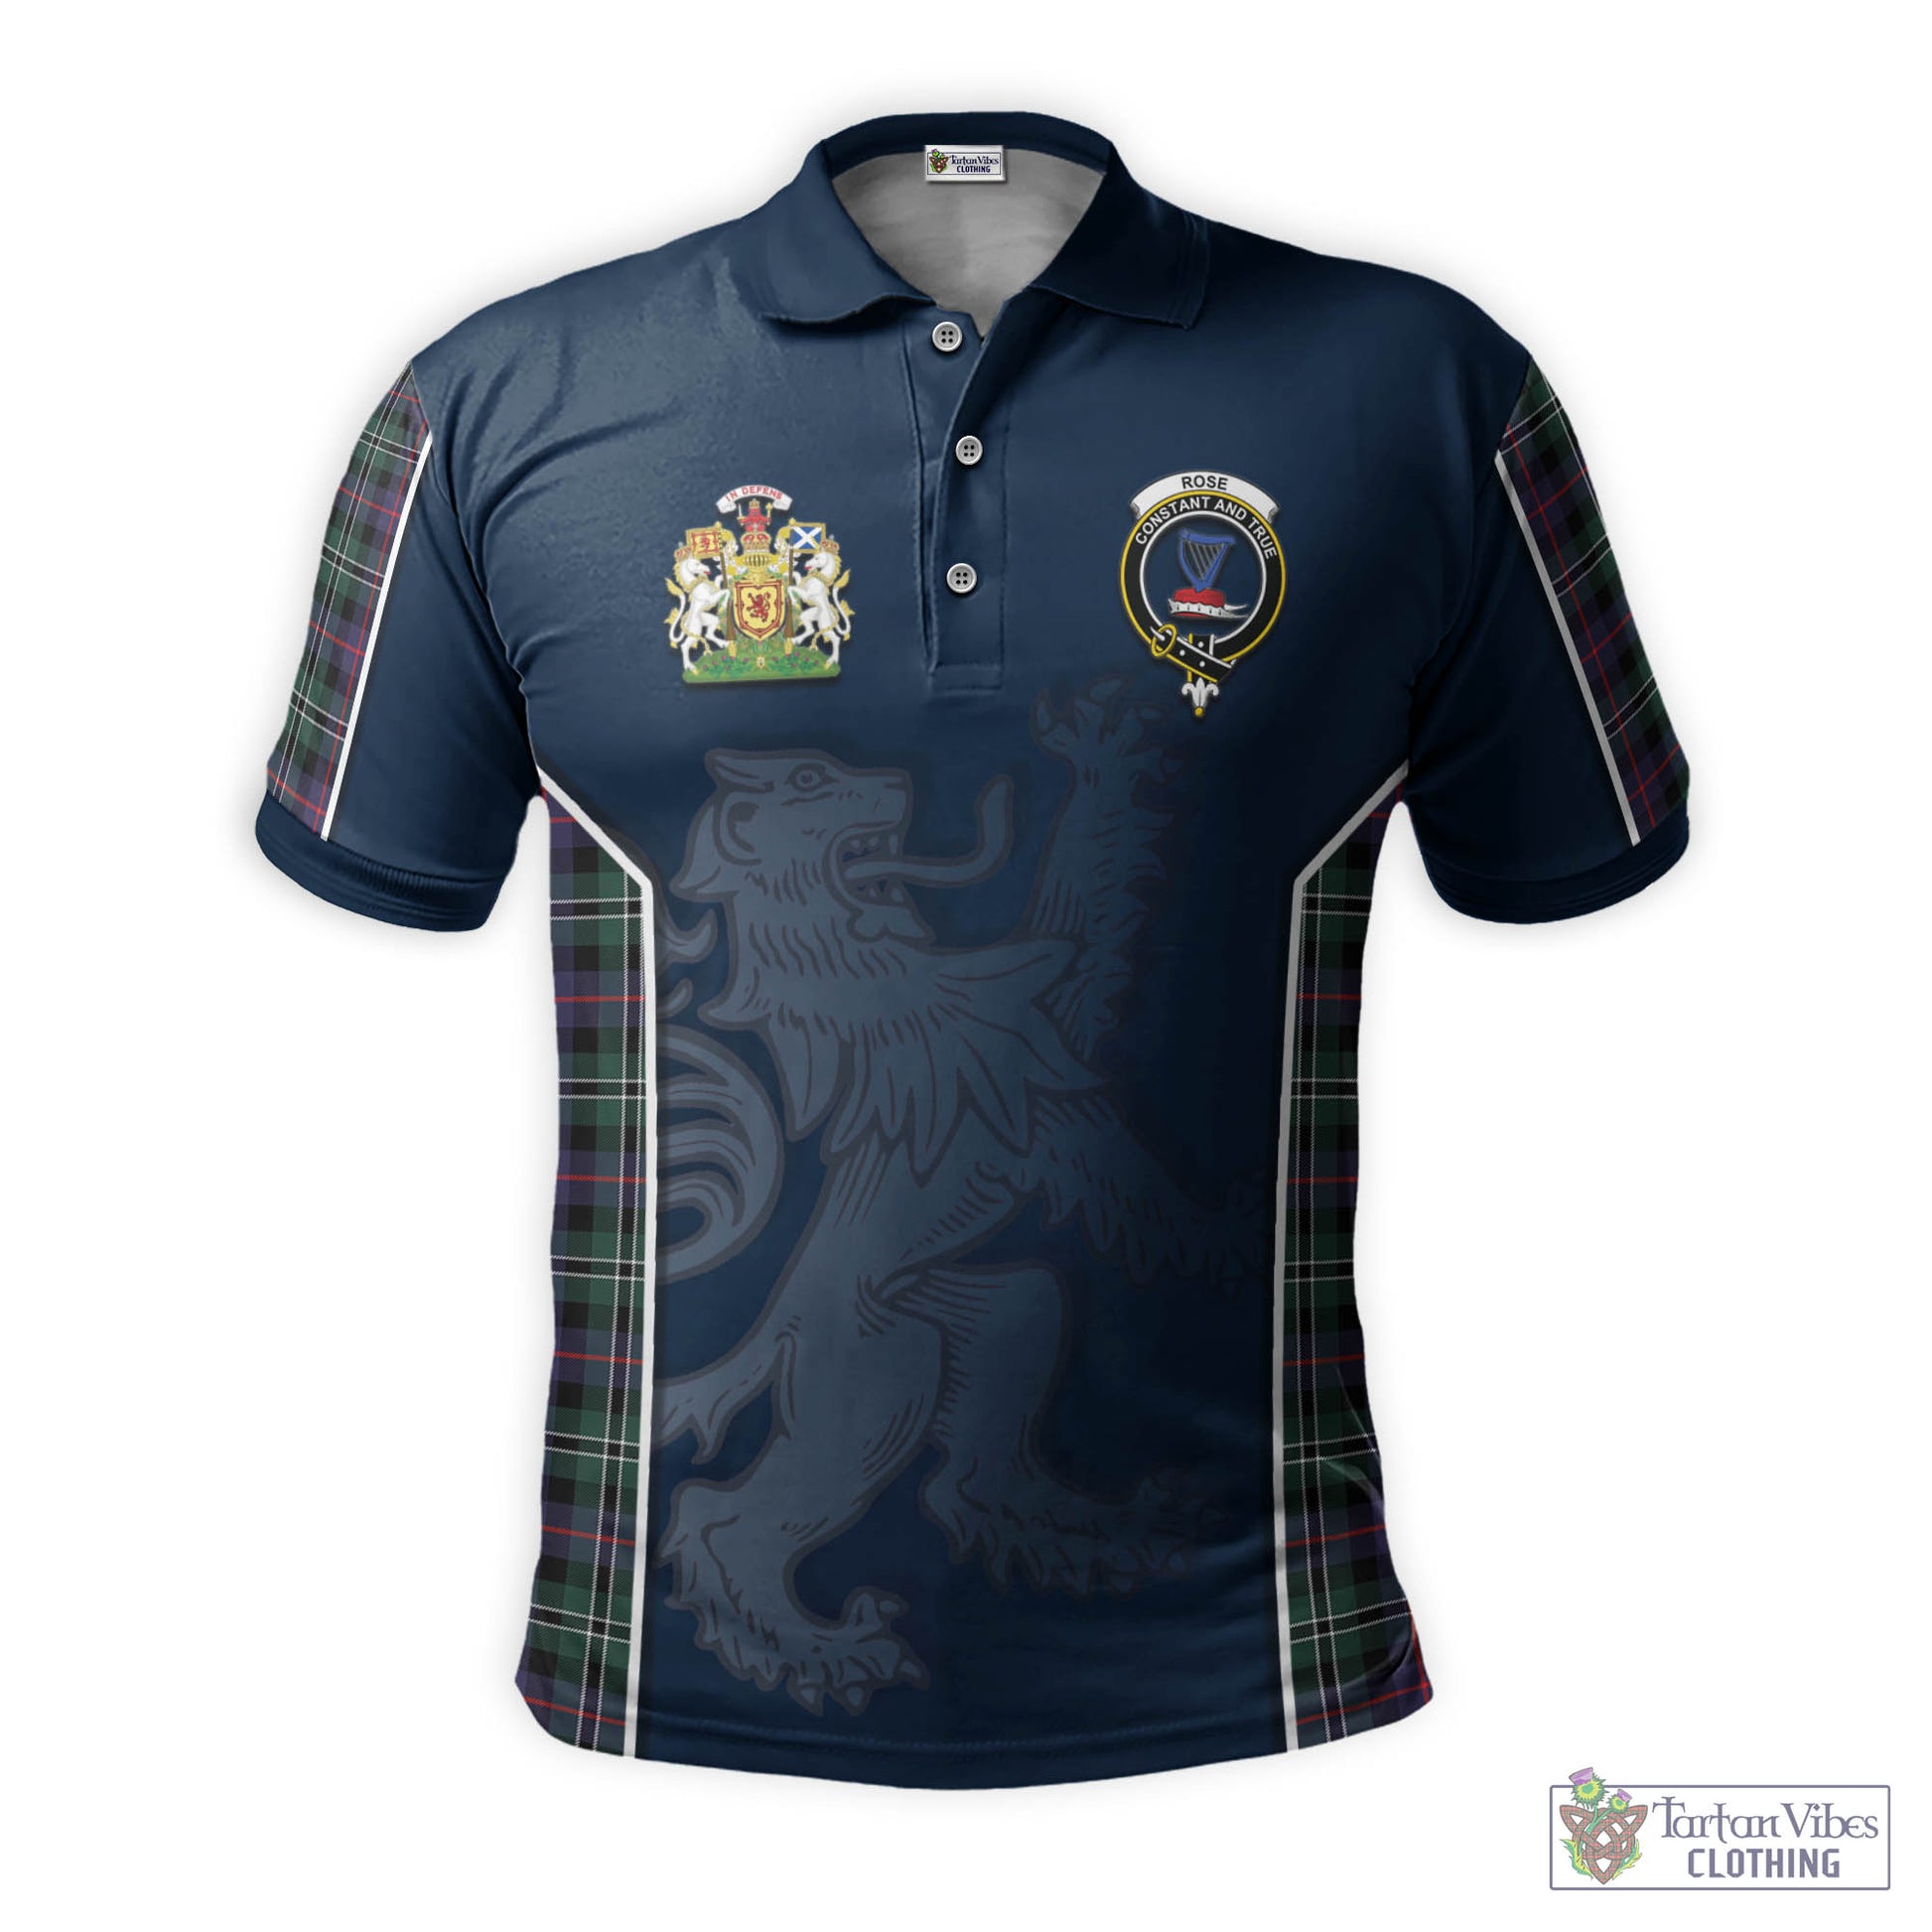 Tartan Vibes Clothing Rose Hunting Modern Tartan Men's Polo Shirt with Family Crest and Lion Rampant Vibes Sport Style